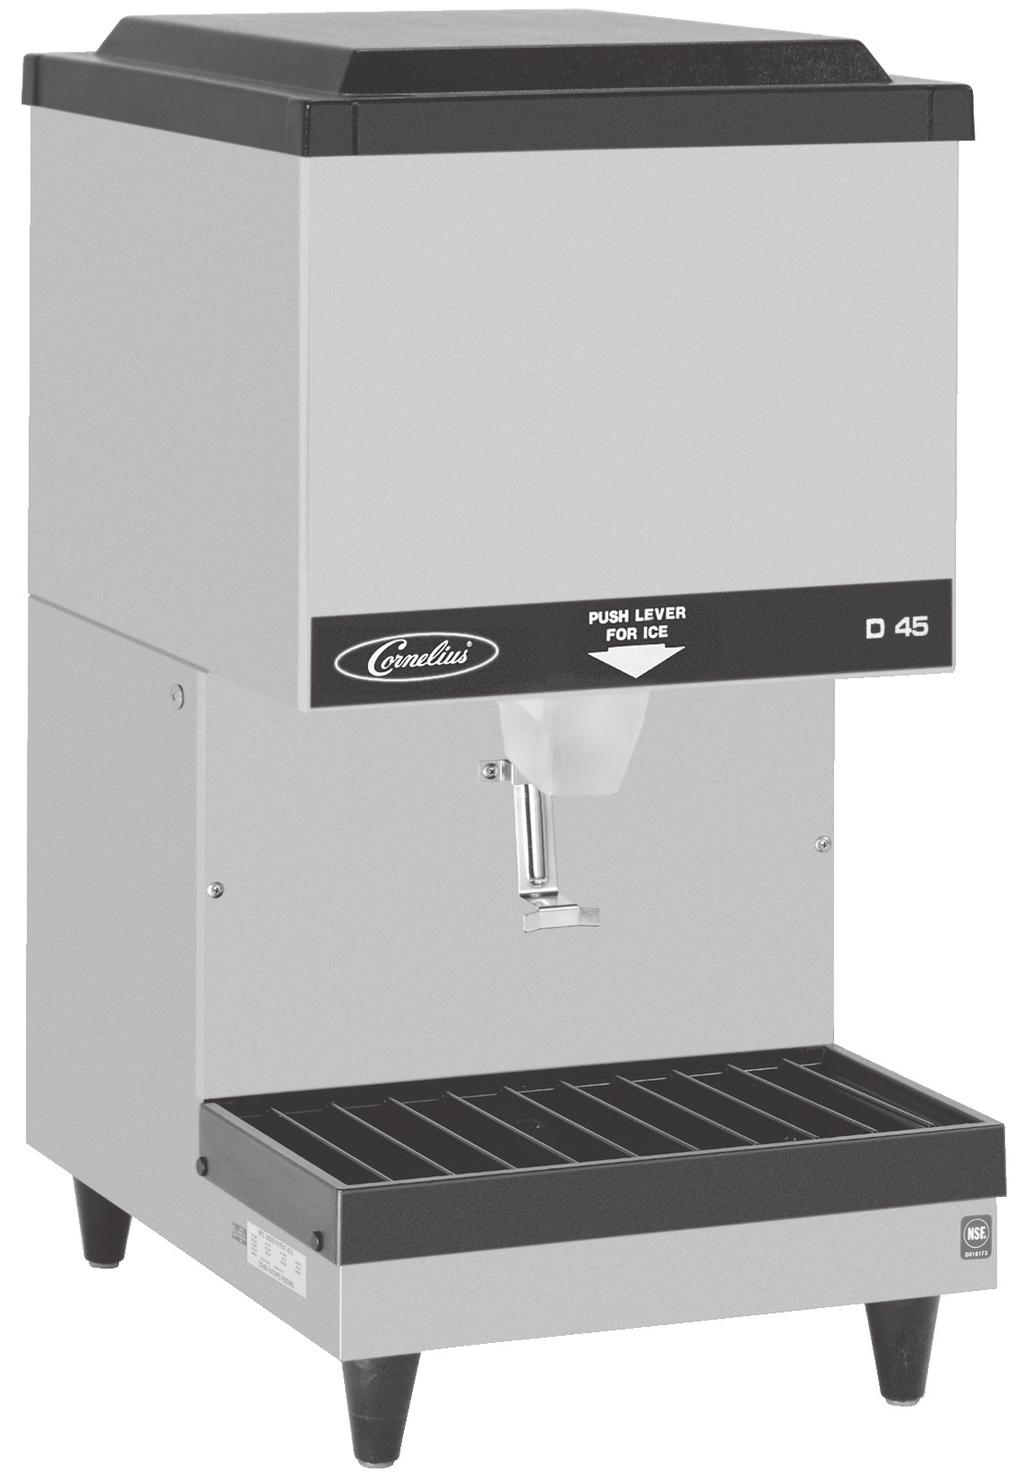 ICE DISPENSER MODELS D45 D45 shown with optional "Get Ice Here" decal FEATURES Small footprint Takes up only 16" (406 mm) of